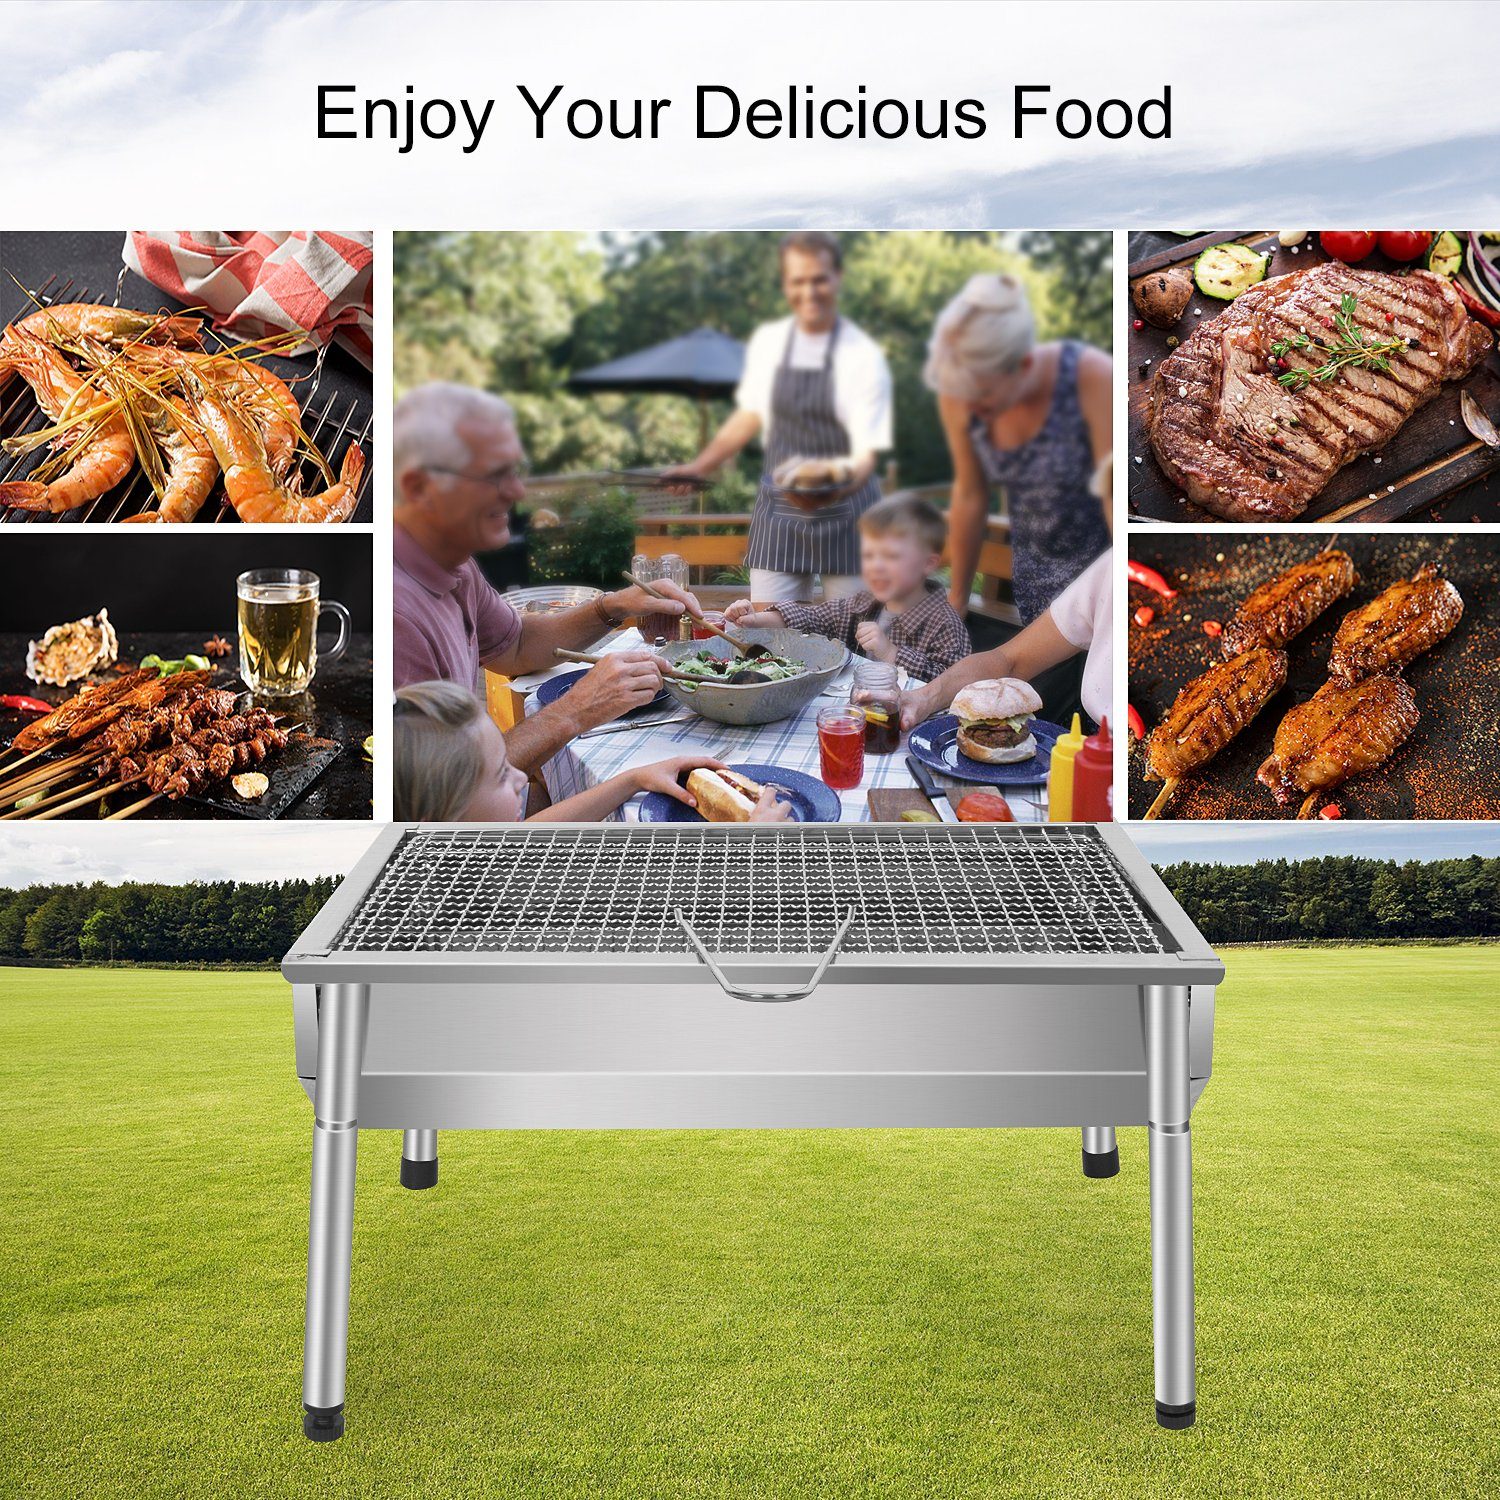 BBQ Holzkohlegrill Tragbar Standgrill Schaschlikgrill Edelstahl Barbecue Outdoor 